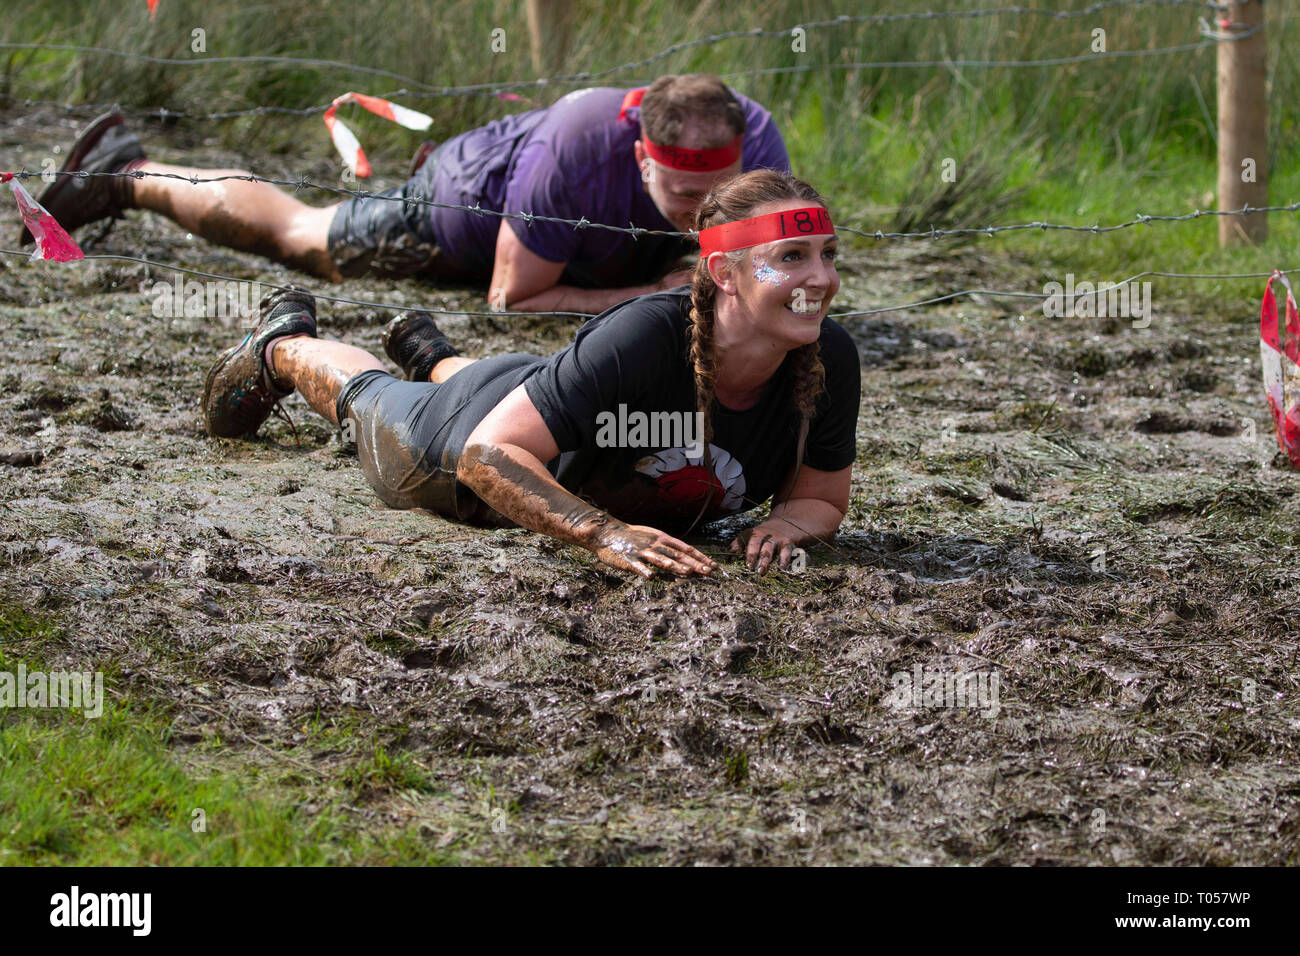 Female athlete crawling through mud with barbed wire above her, Yorkshire Warrior 10km Race, Ripley, North Yorkshire, England, UK. Stock Photo